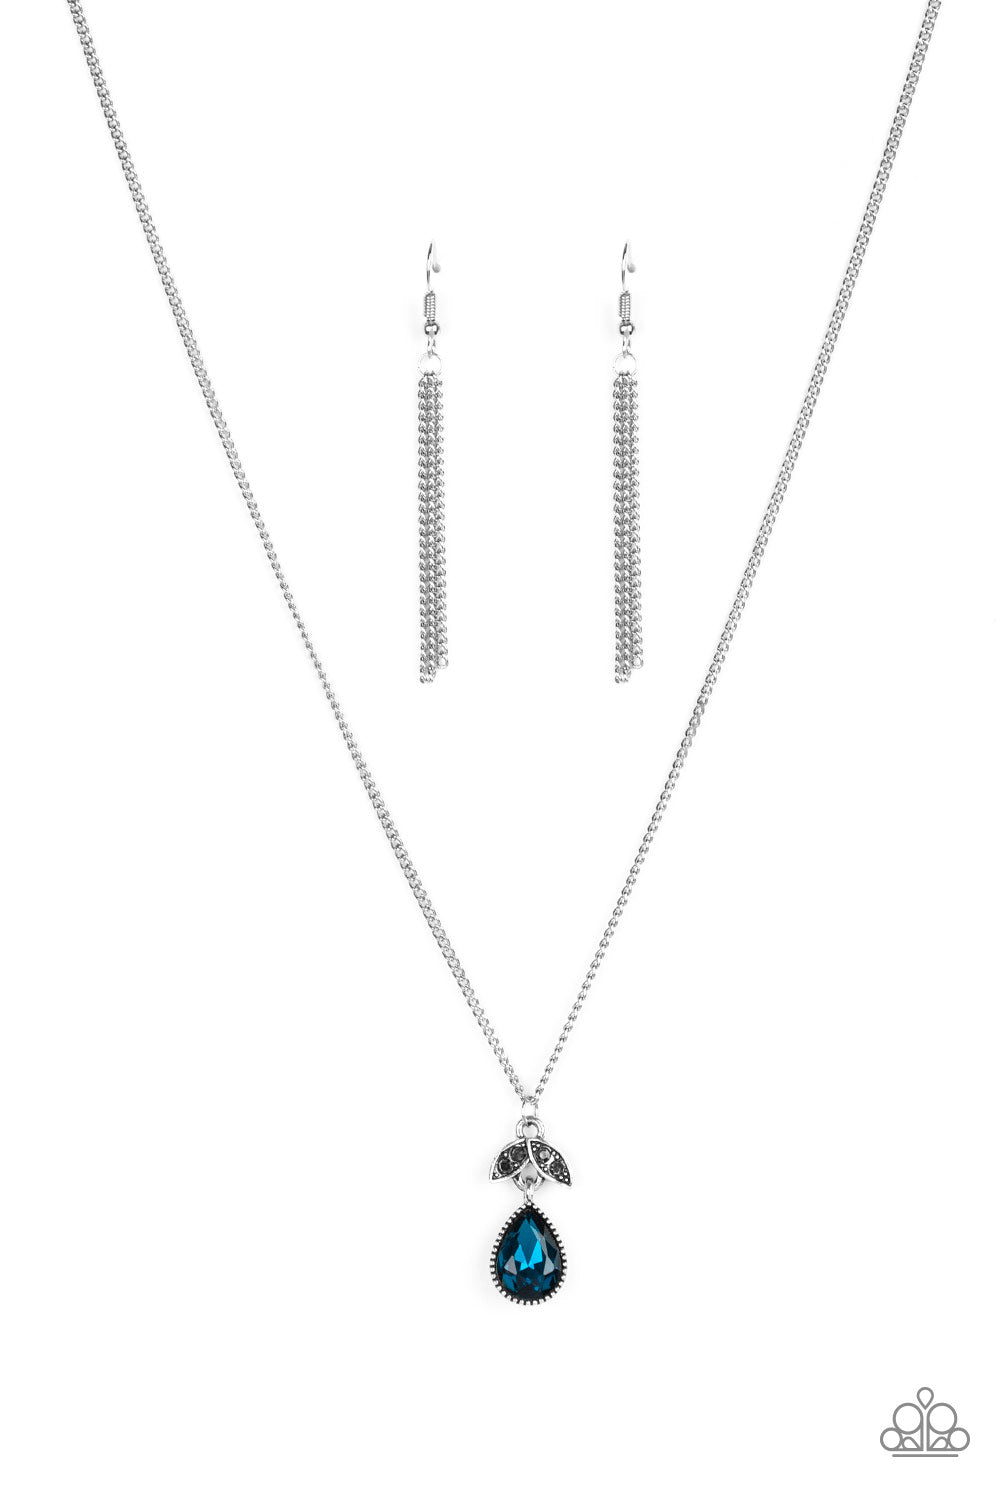 Paparazzi Accessories - Blue encrusted in glittery hematite rhinestones, leafy silver frames give way to a blue teardrop gem, creating a glamorous pendant below the collar.